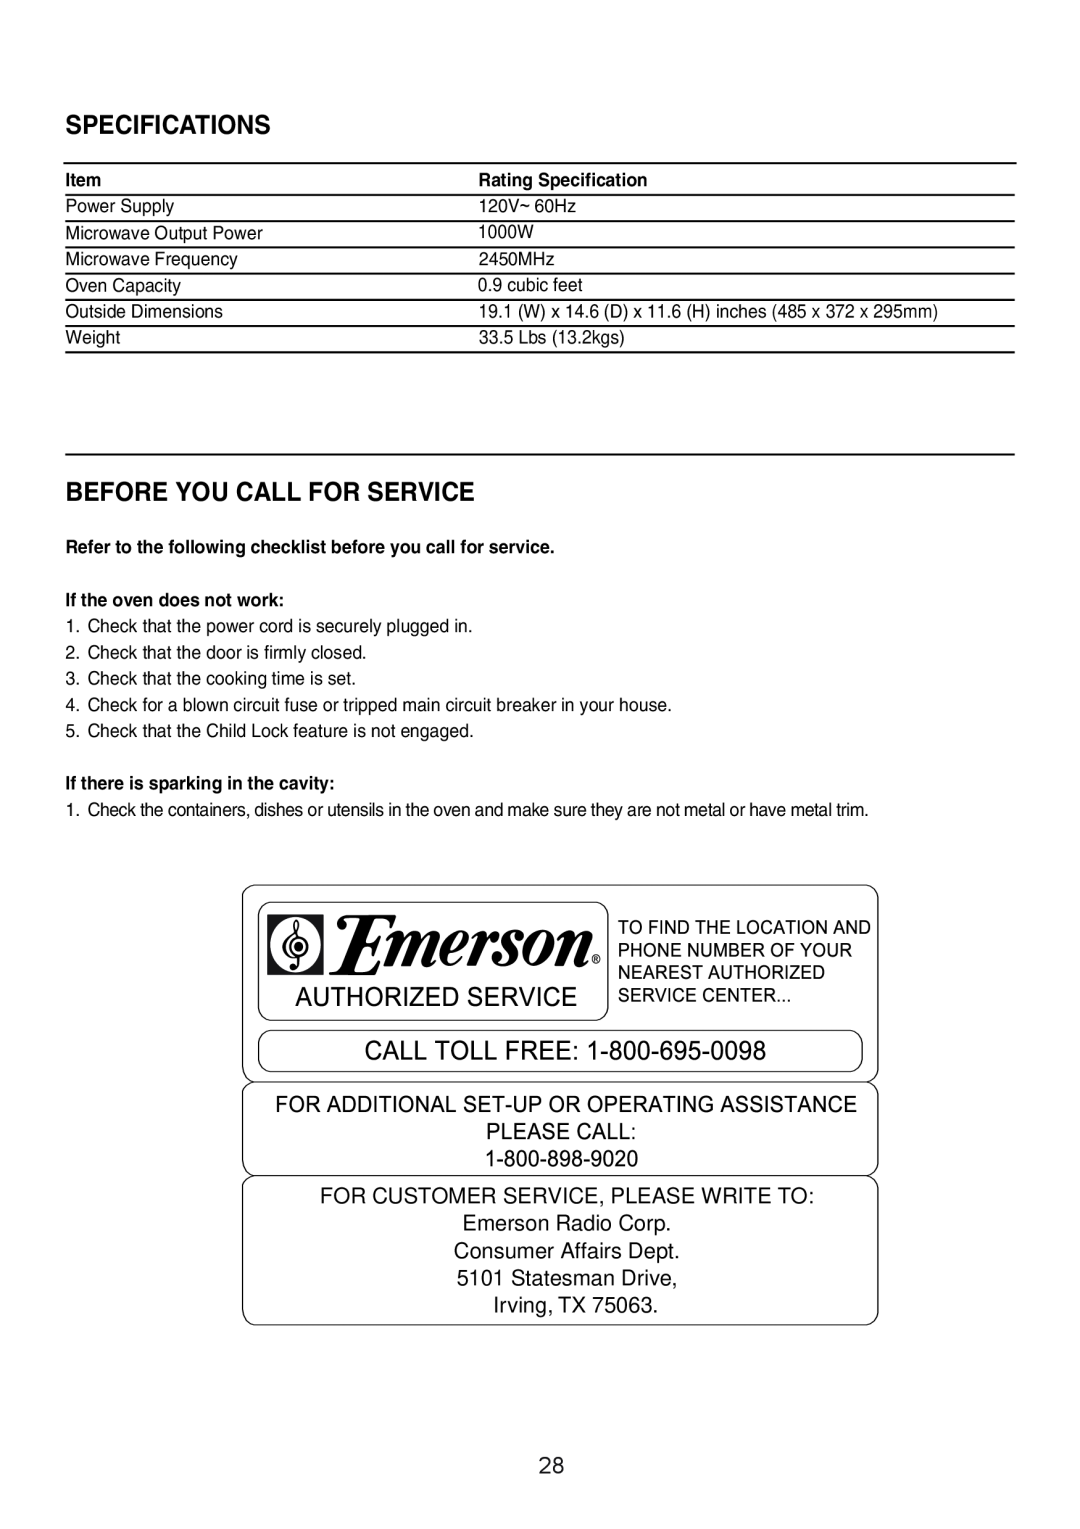 Emerson MW8115SS Specifications, Before You Call For Service, FOR CUSTOMER SERVICE, PLEASE WRITE TO Emerson Radio Corp 